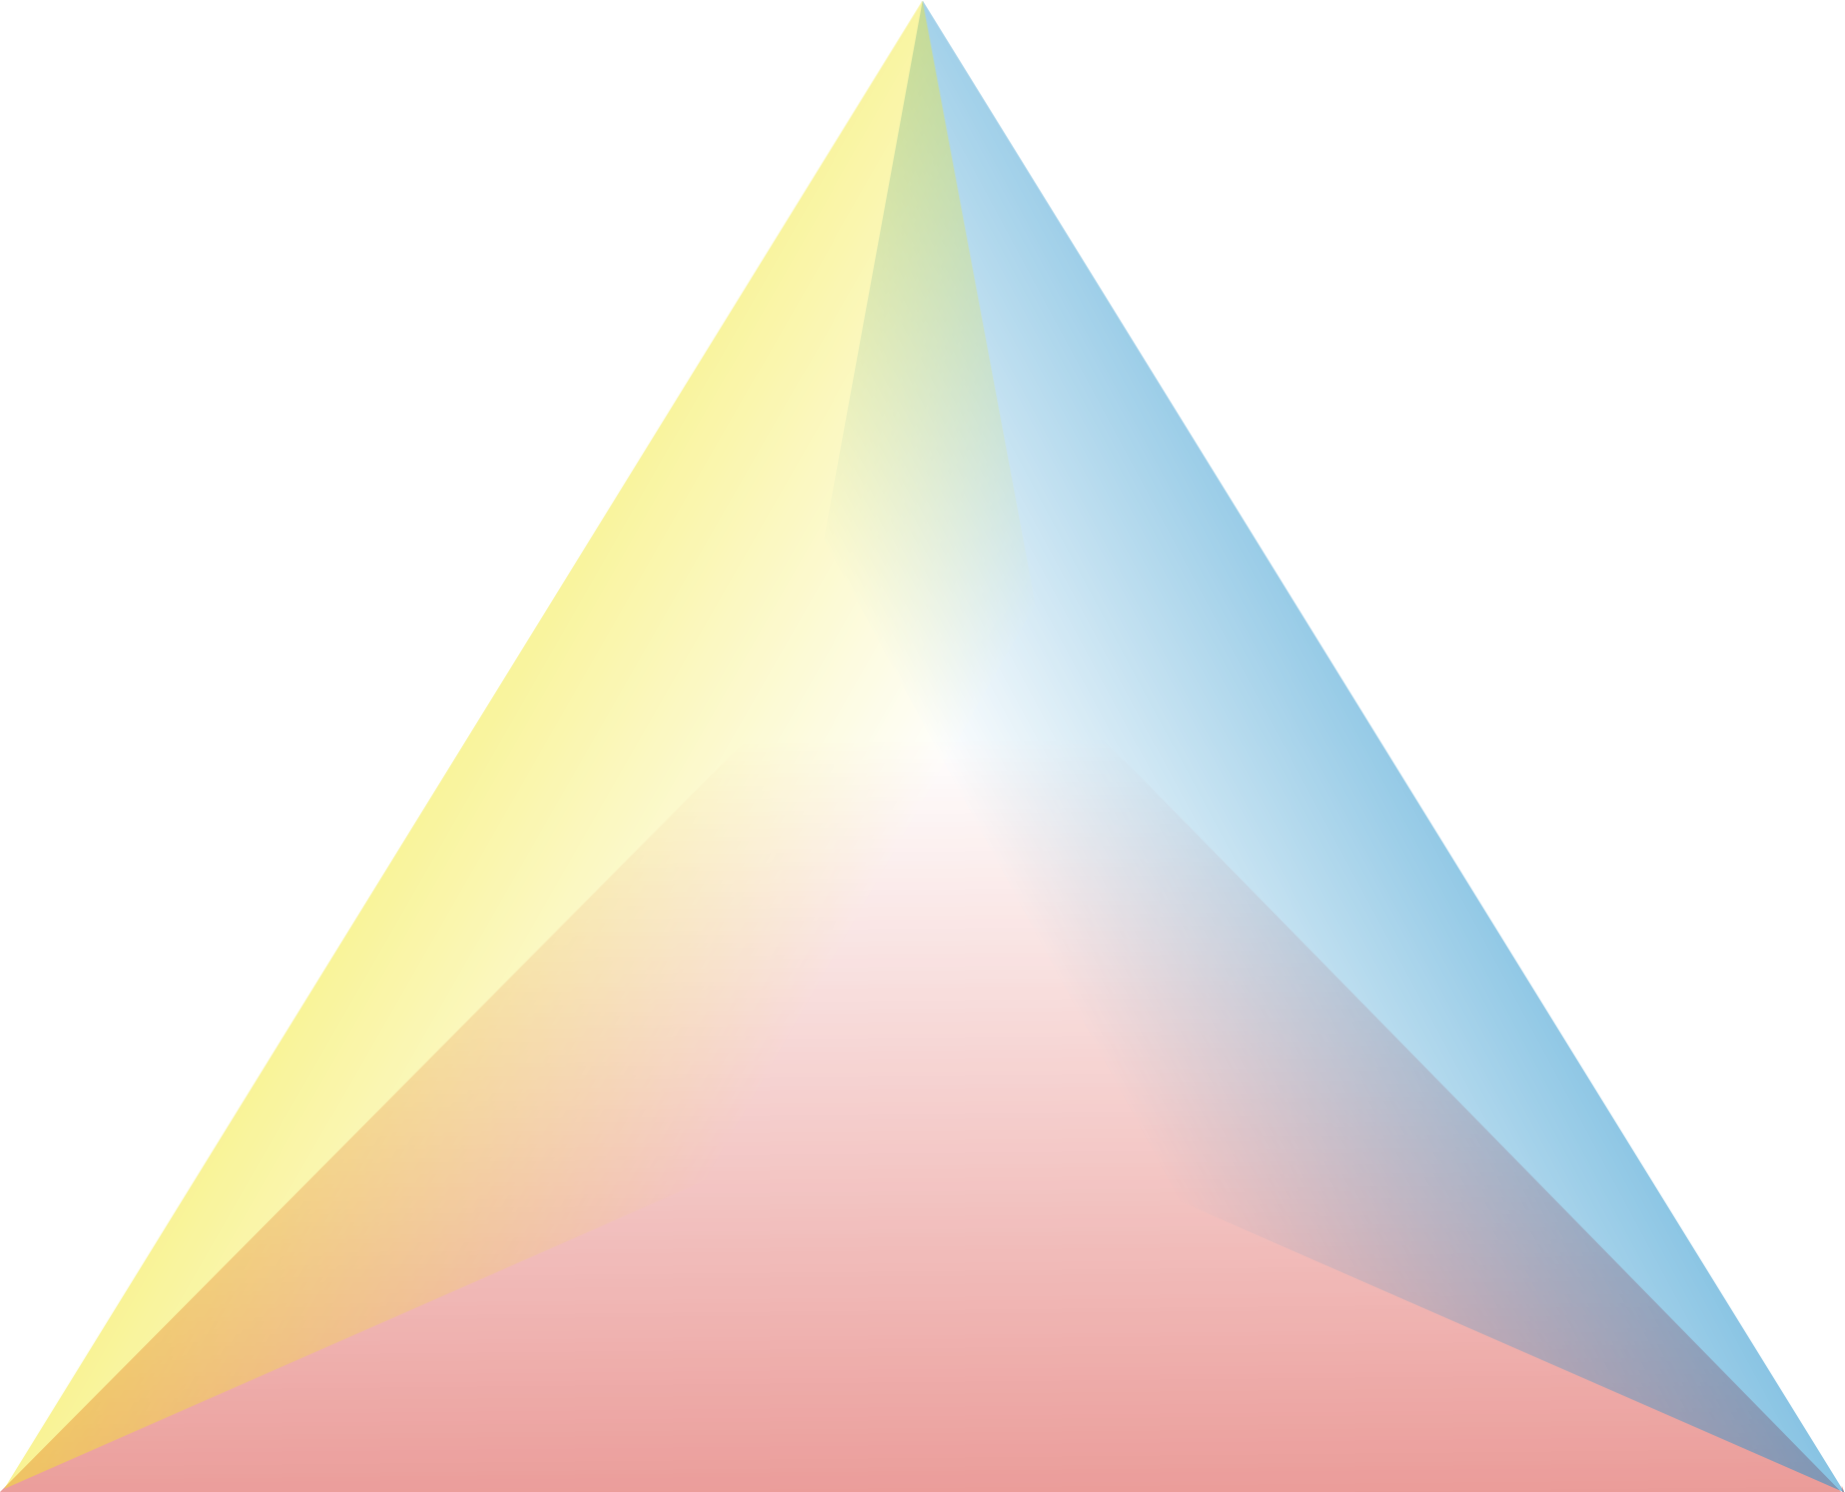 File:Triangle model of love.png - Wikimedia Commons